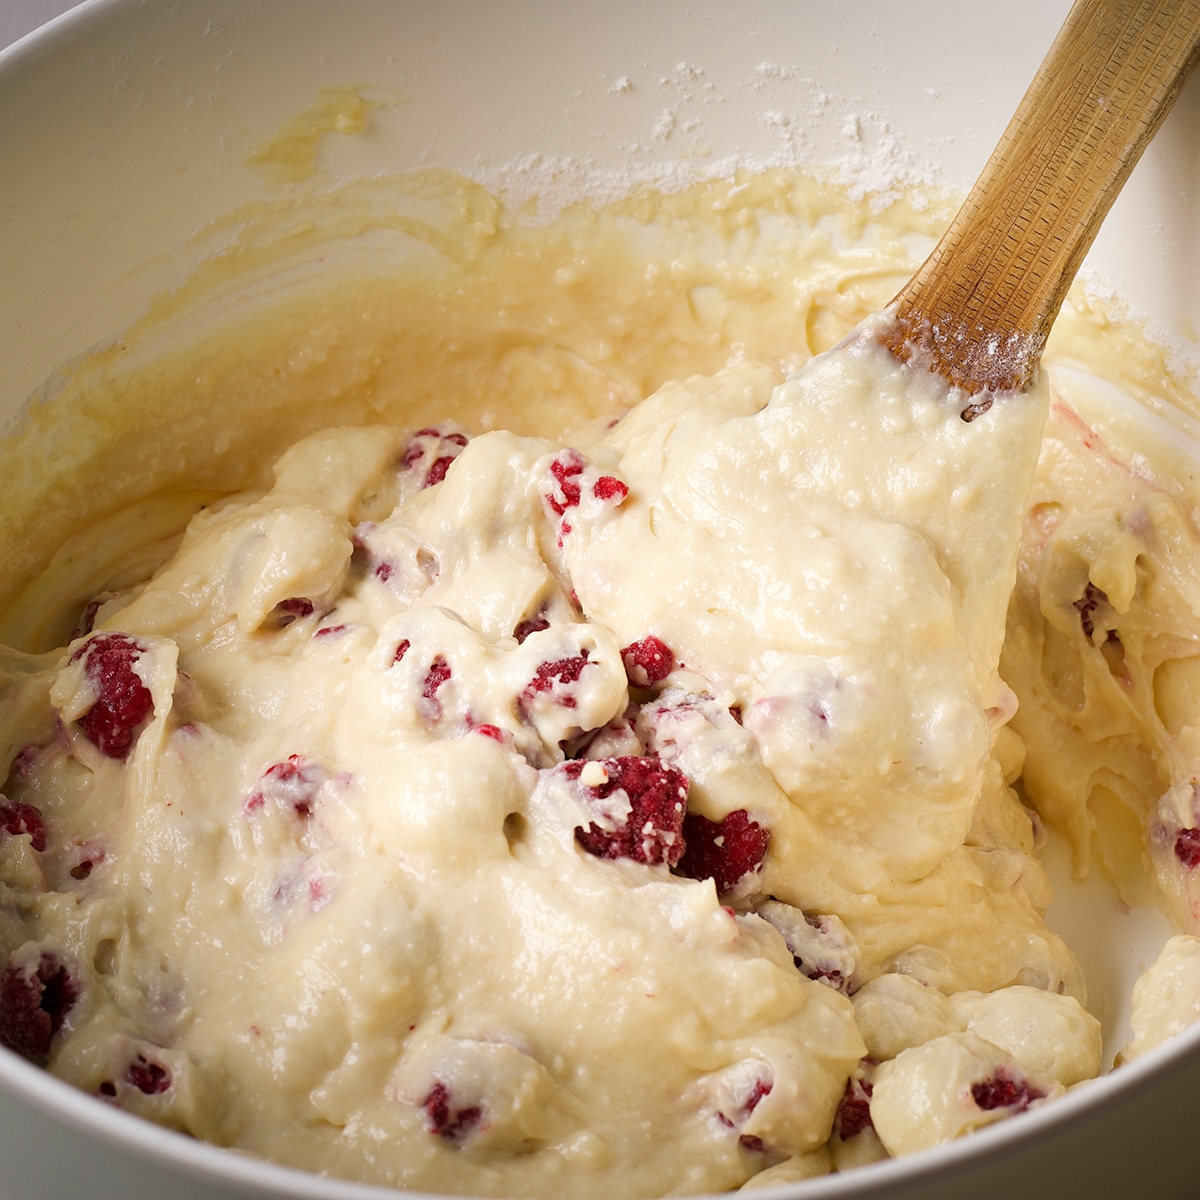 Using a wooden spoon to fold raspberries into muffin batter.